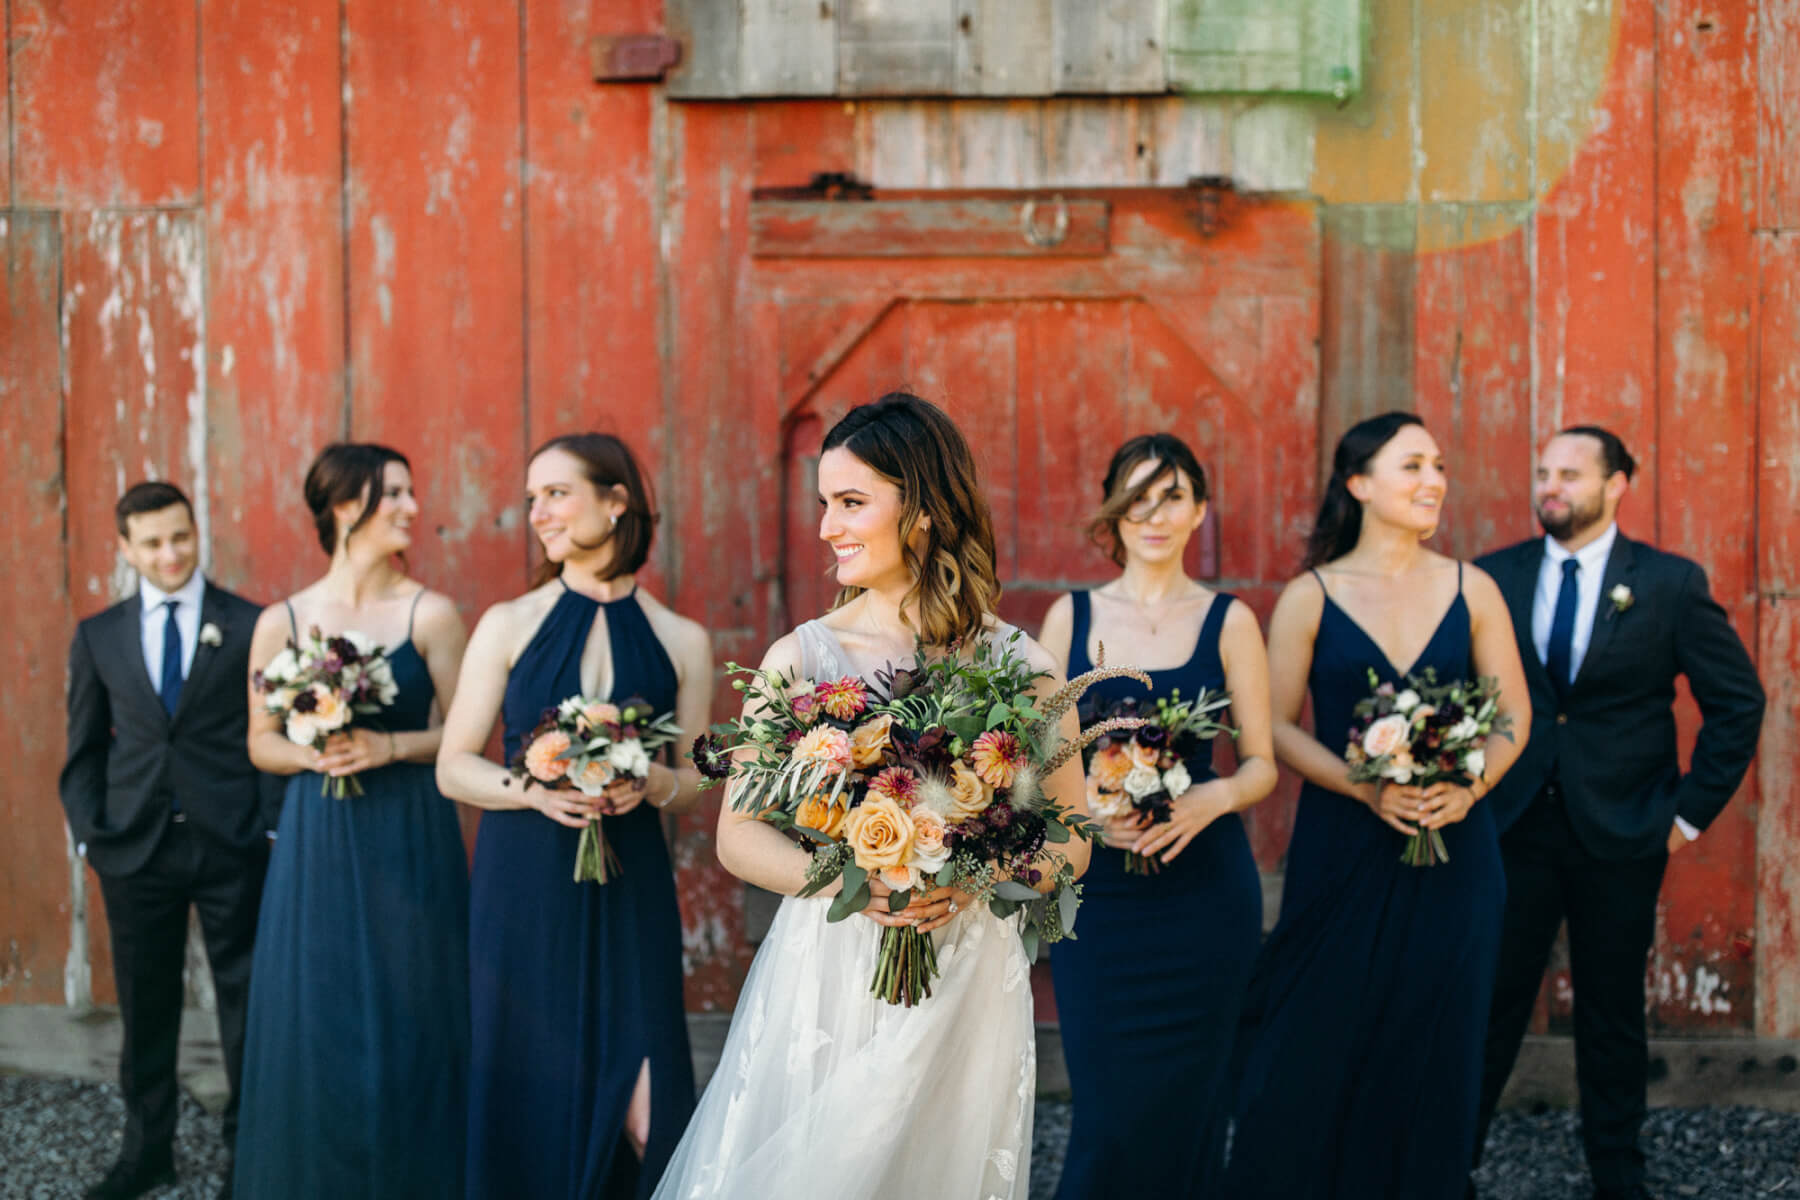 Bride and bridesmaids holding floral wedding bouquets with groomsmen and rustic barn in background at Stemple Creek Ranch in Marin County